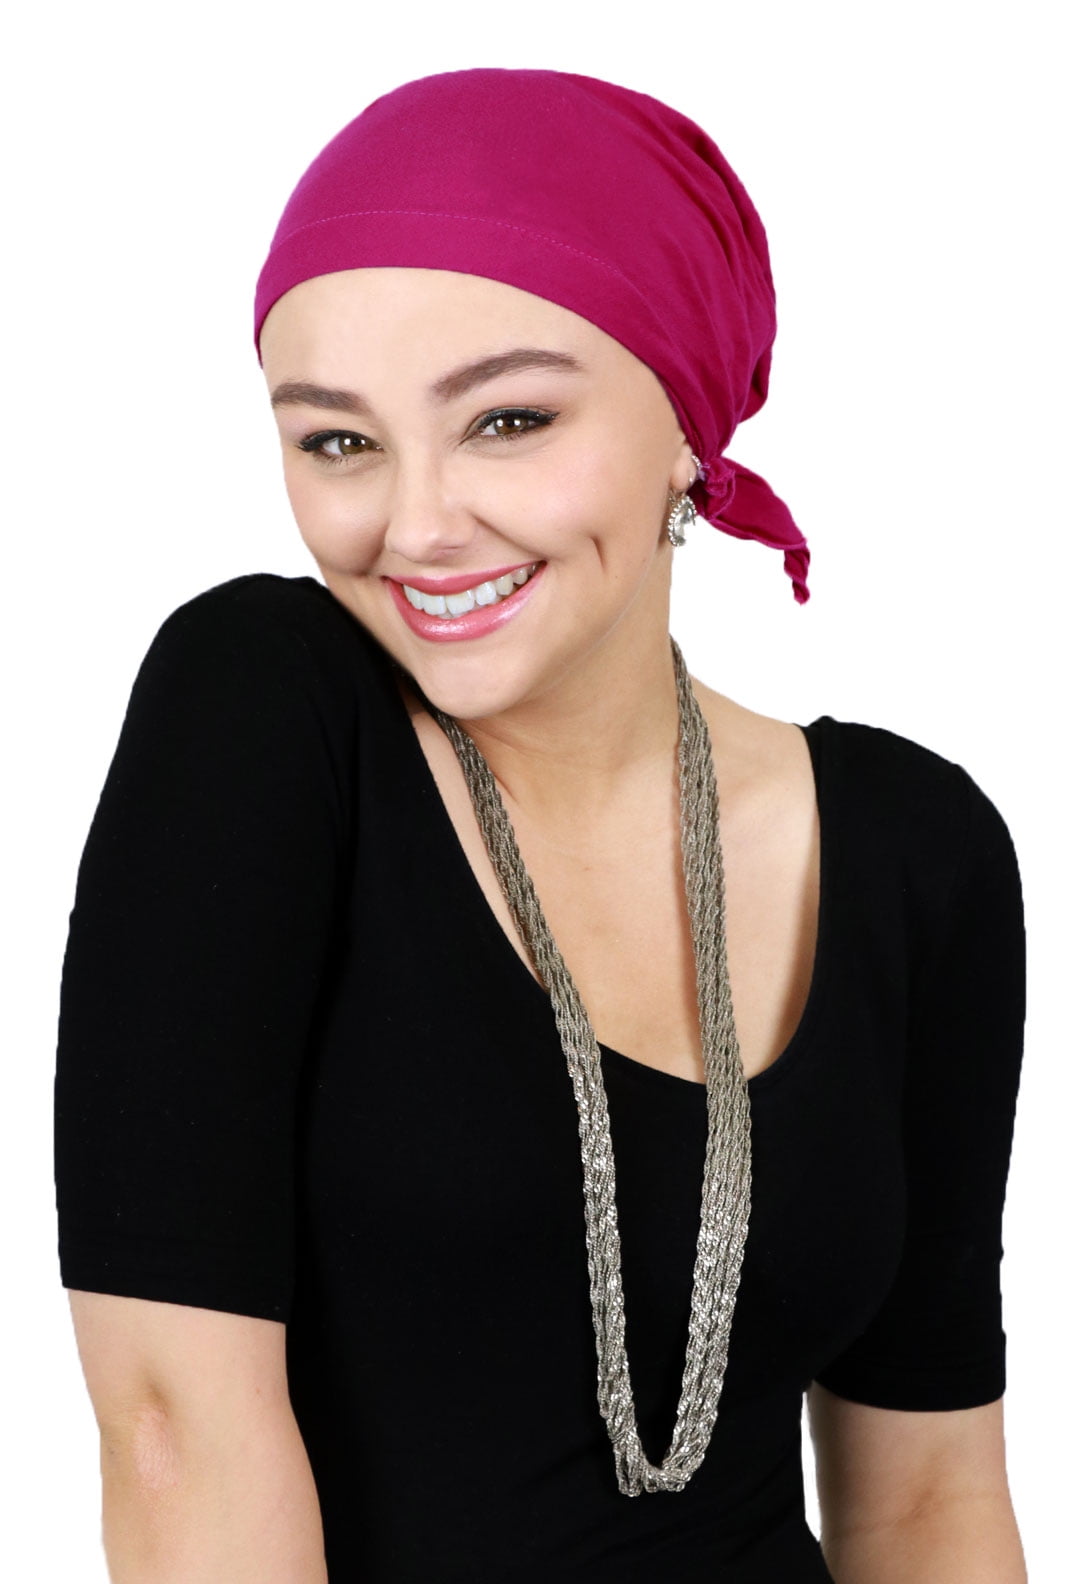 Cancer Chemo Turban Burgundy Rose Women's Cancer Chemo Scarf Gifts for Cancer Patients Mitpachat Headwrap Tichel Head Covering